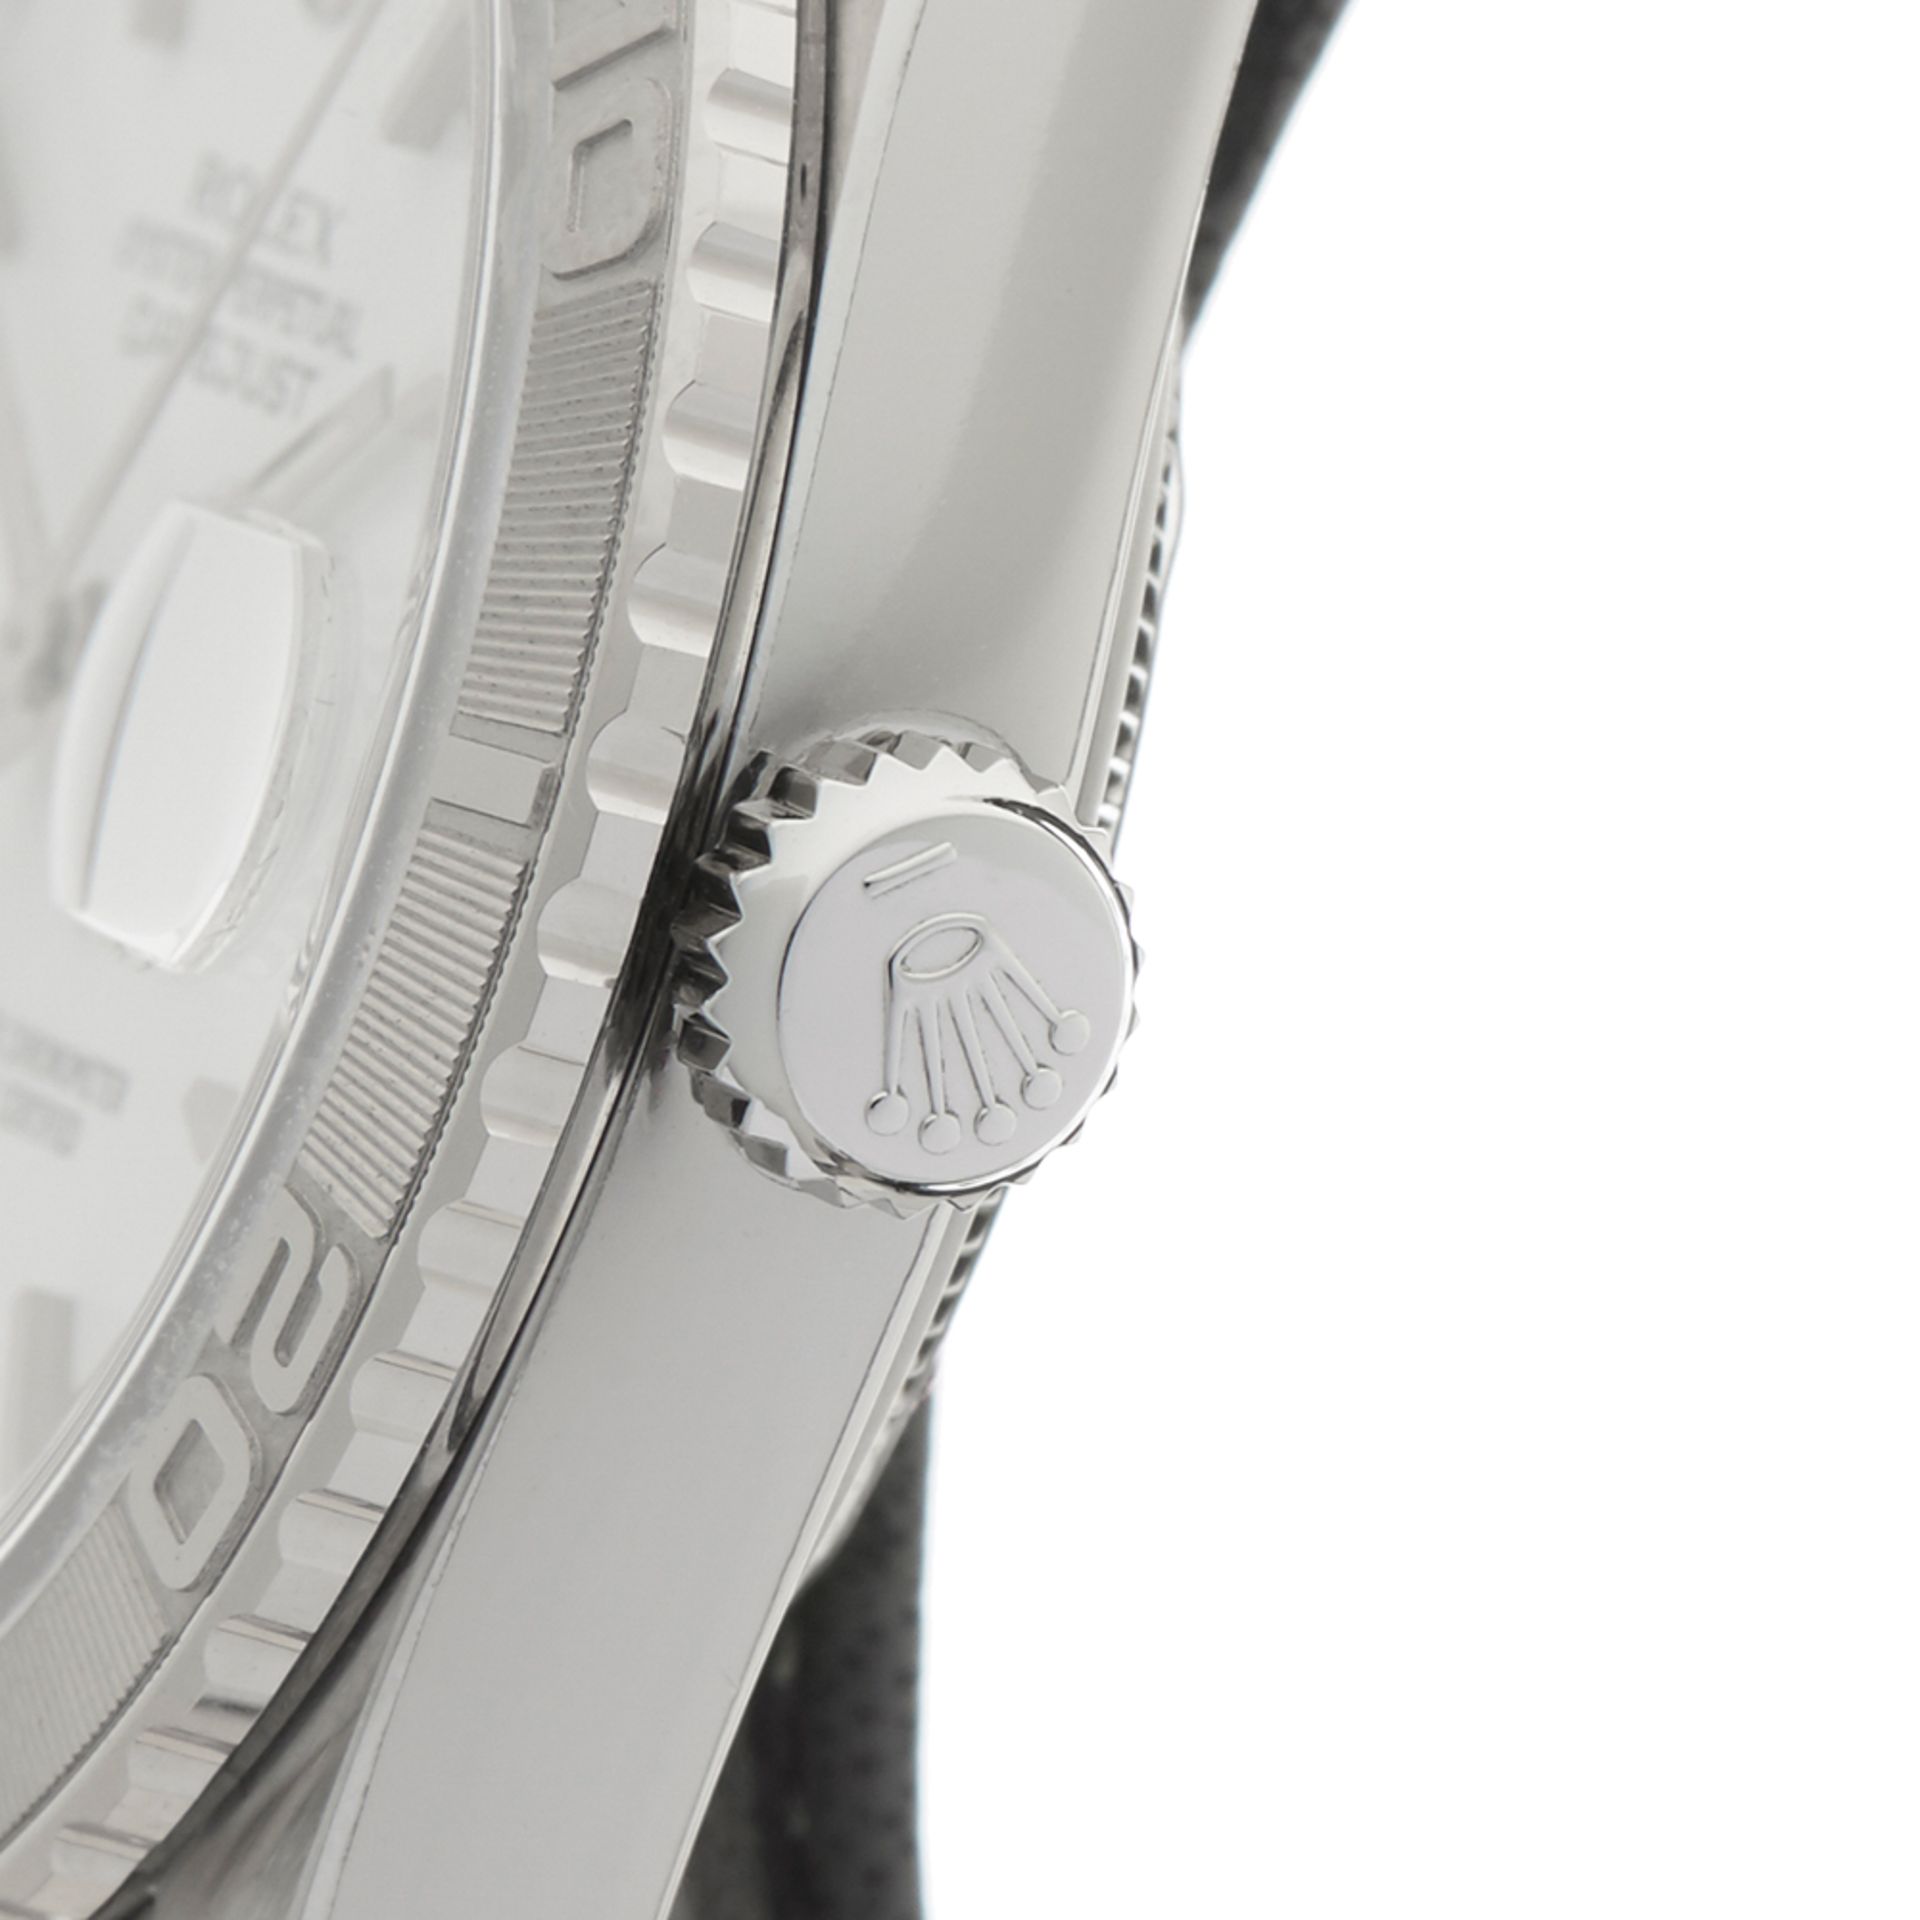 Datejust 36mm Stainless Steel - 16264 - Image 4 of 9